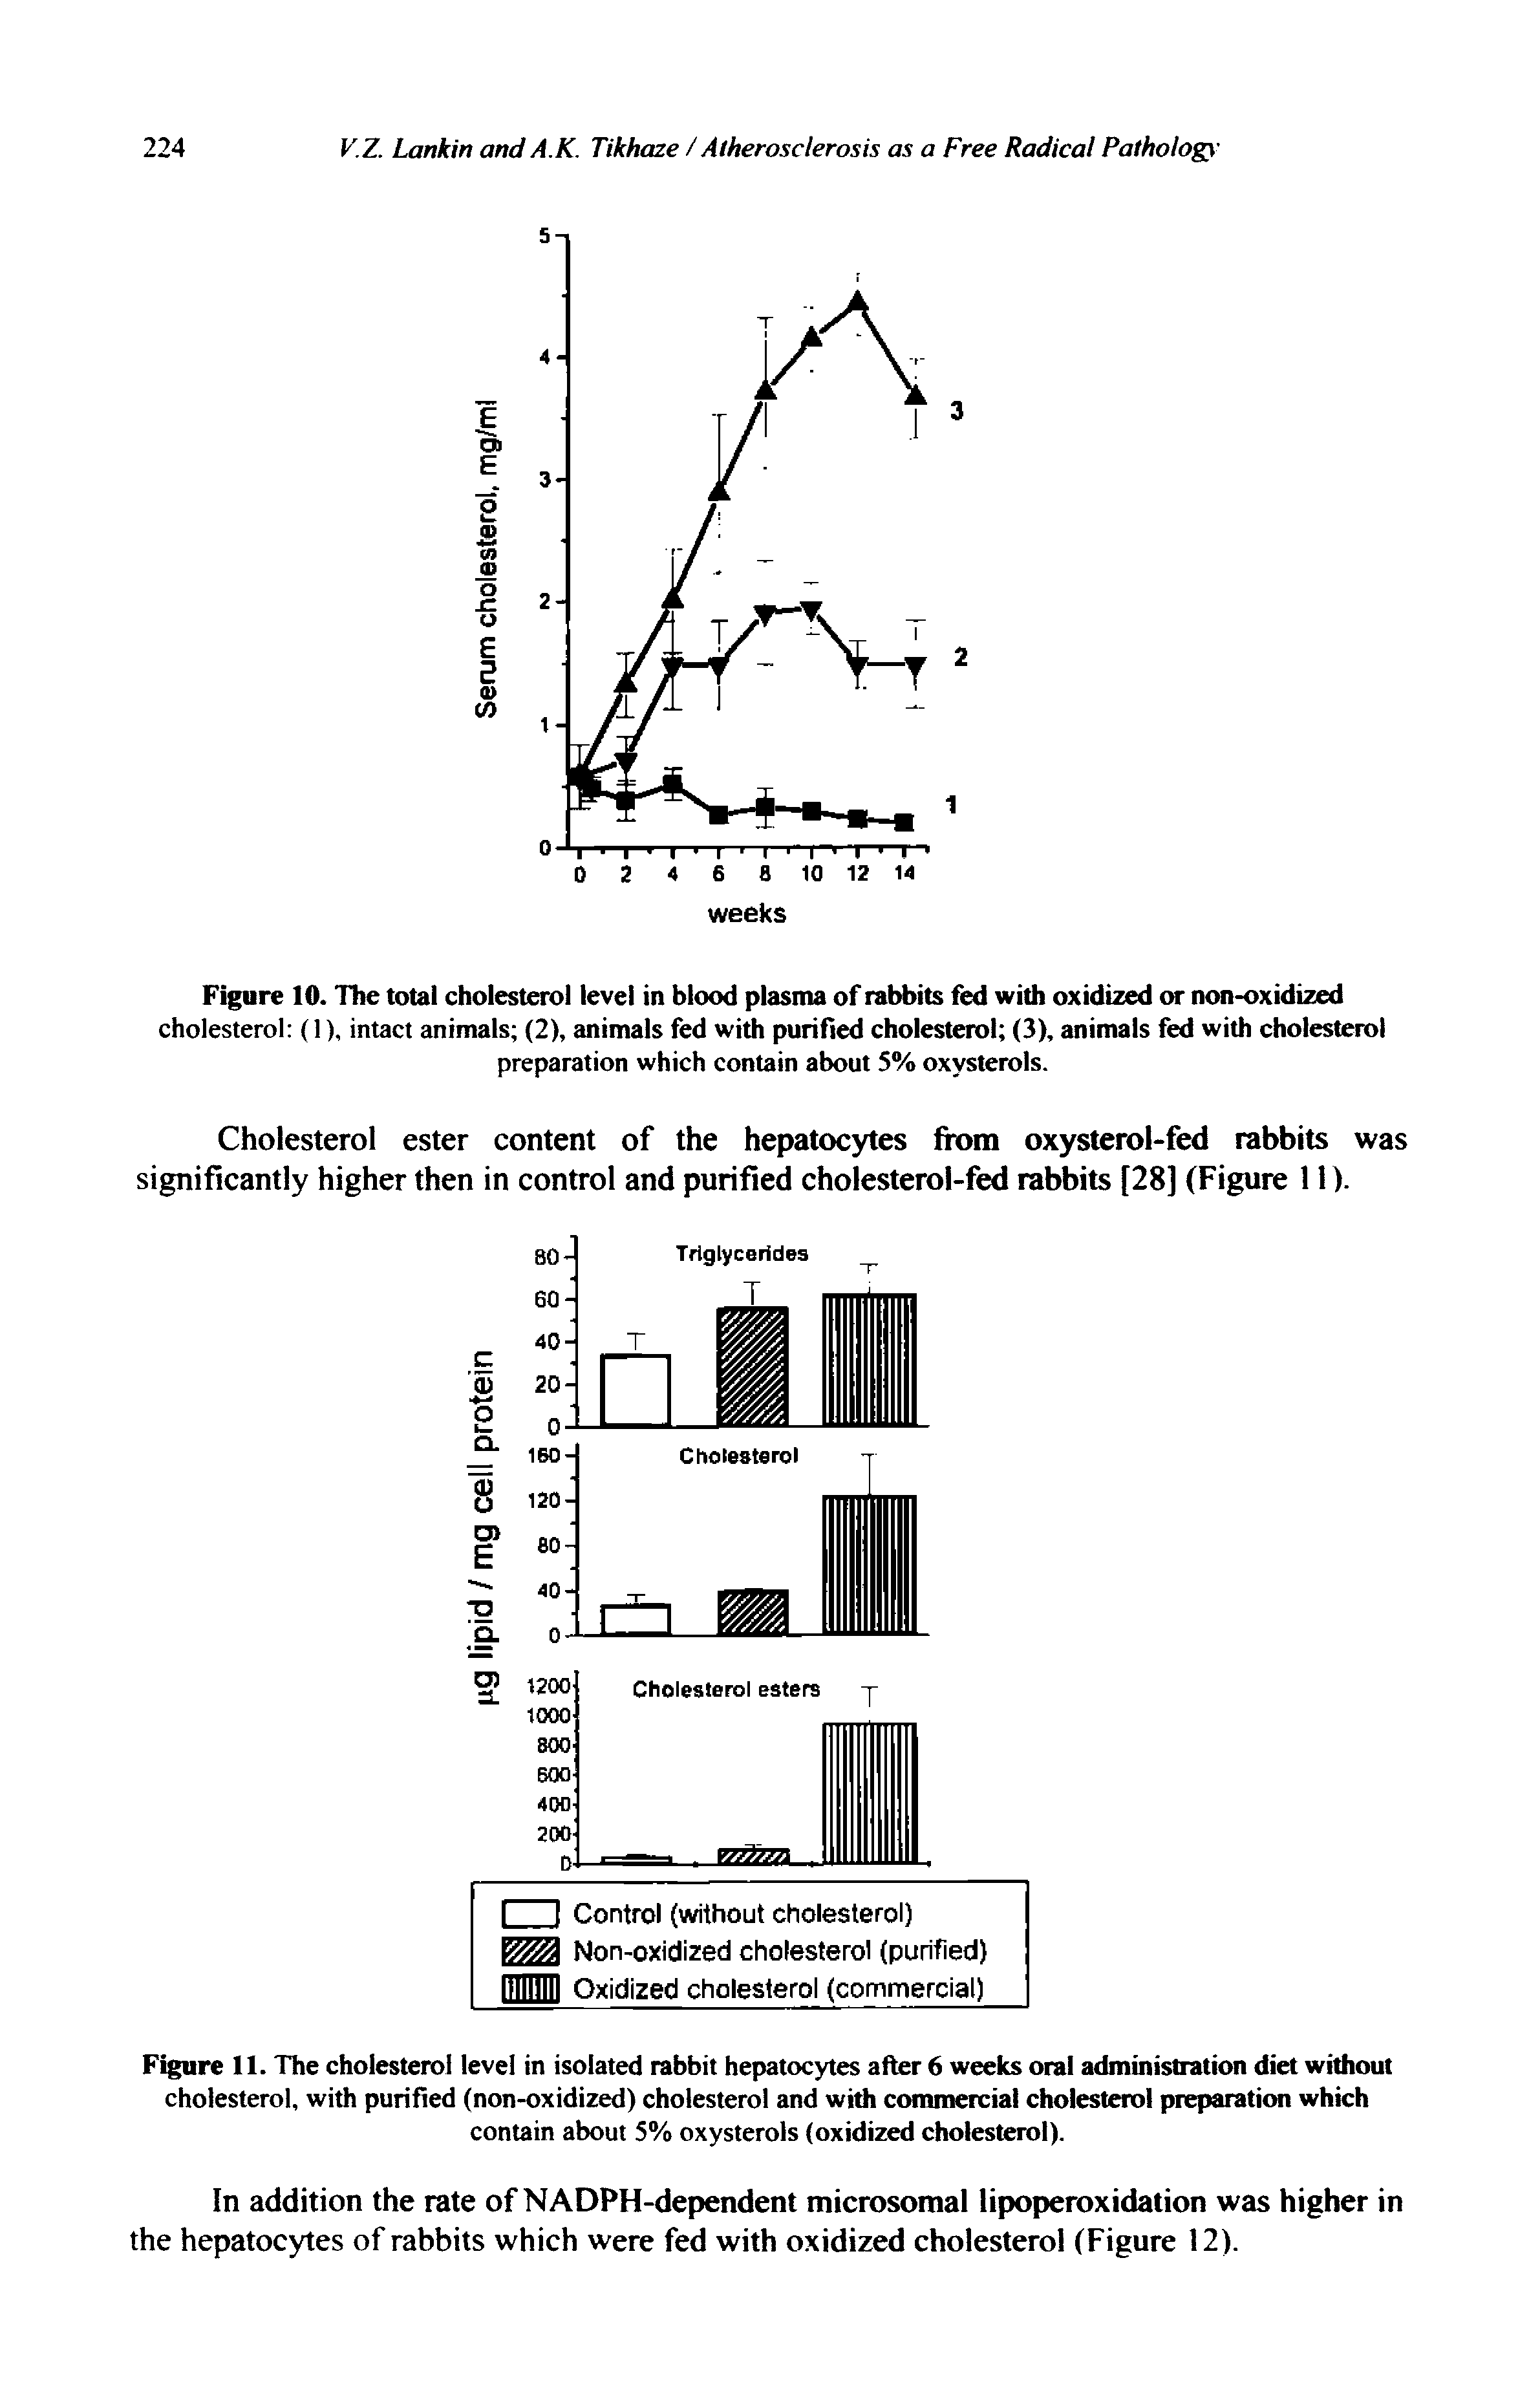 Figure 10. The total cholesterol level in blood plasma of rabbits fed with oxidized or non-oxidized cholesterol (1), intact animals (2), animals fed with purified cholesterol (3), animals fed with cholesterol preparation which contain about 5% oxysterols.